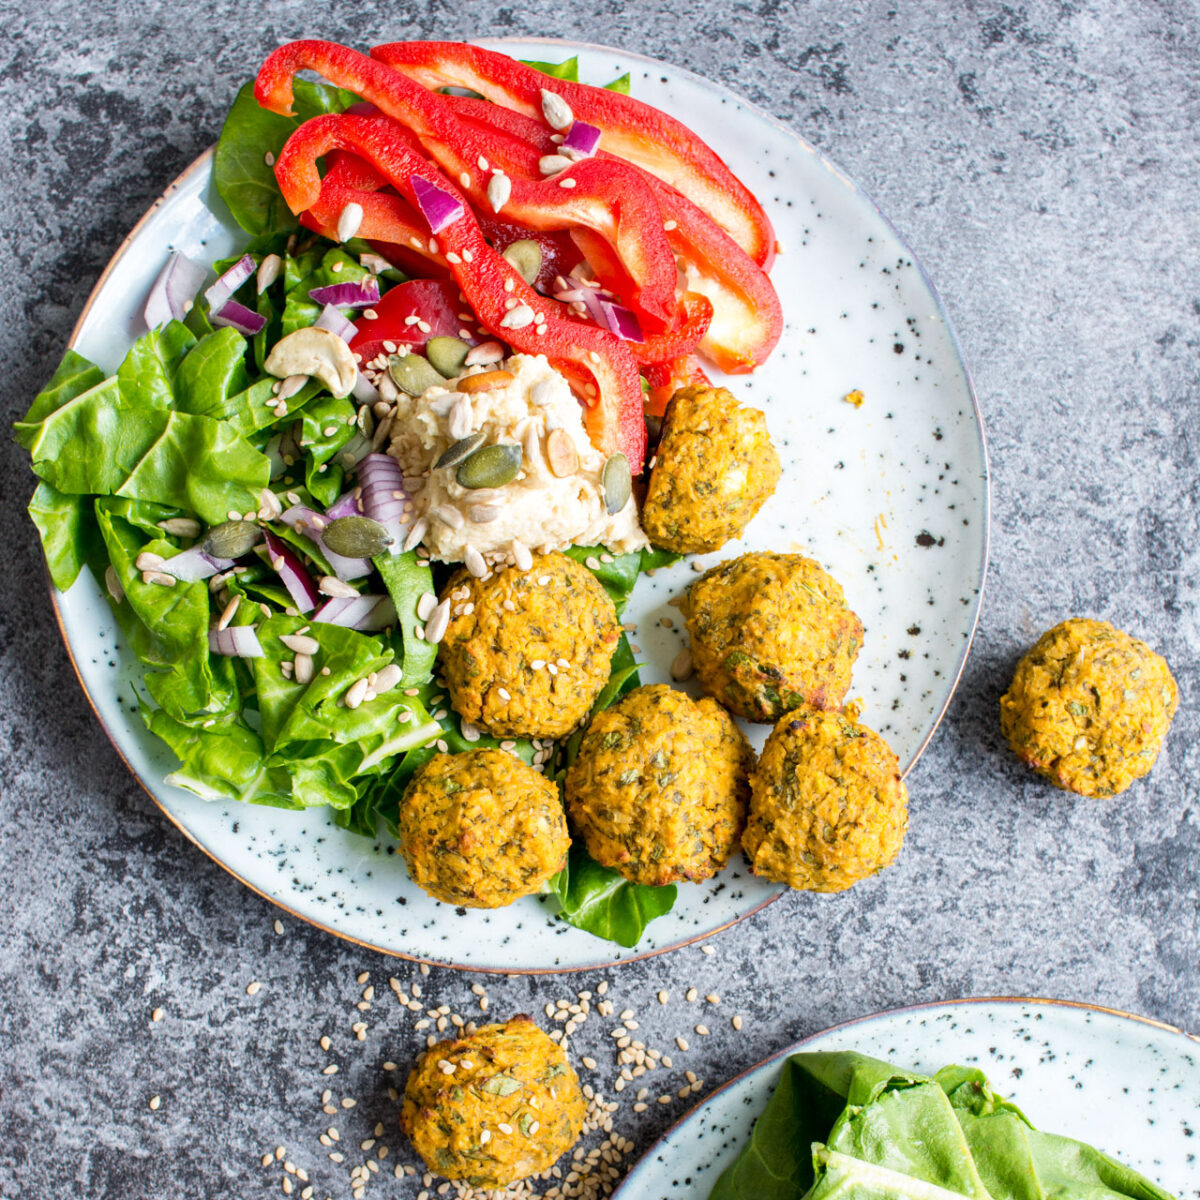 A plate with sweet potato falafel and lettuce and red peppers.